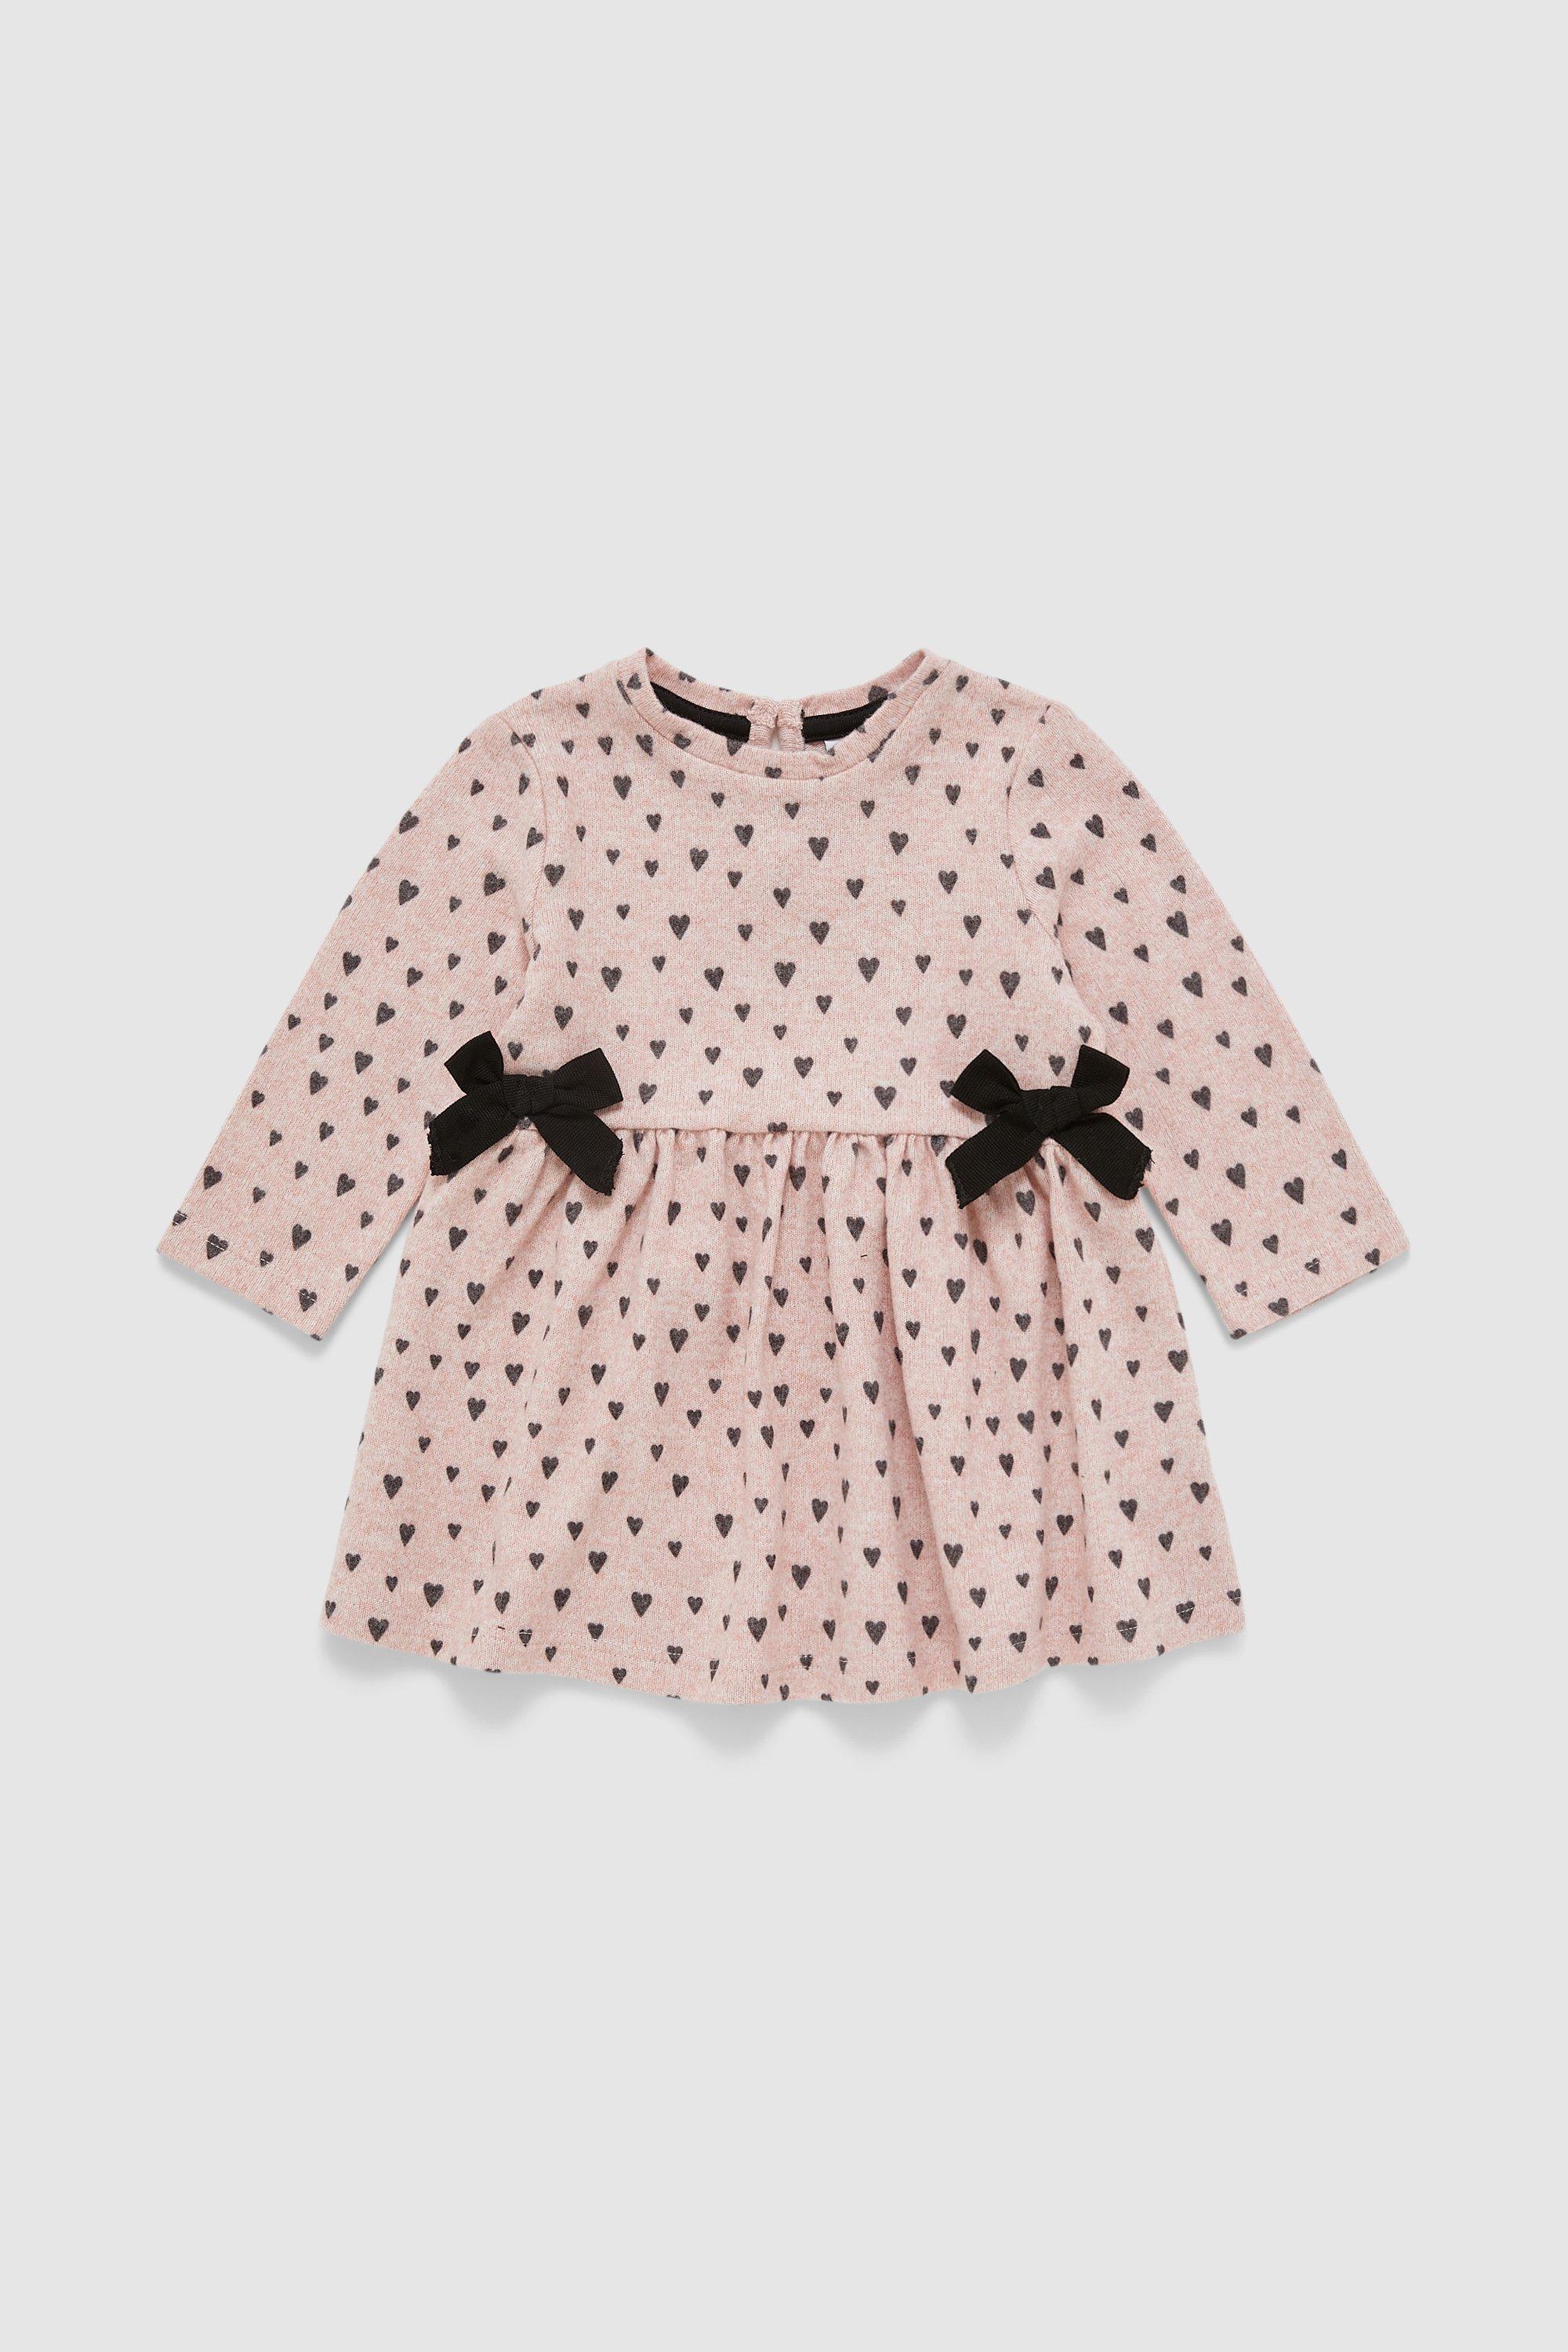 Blue Zoo Baby Girl Knitted Dress With Bow | Debenhams